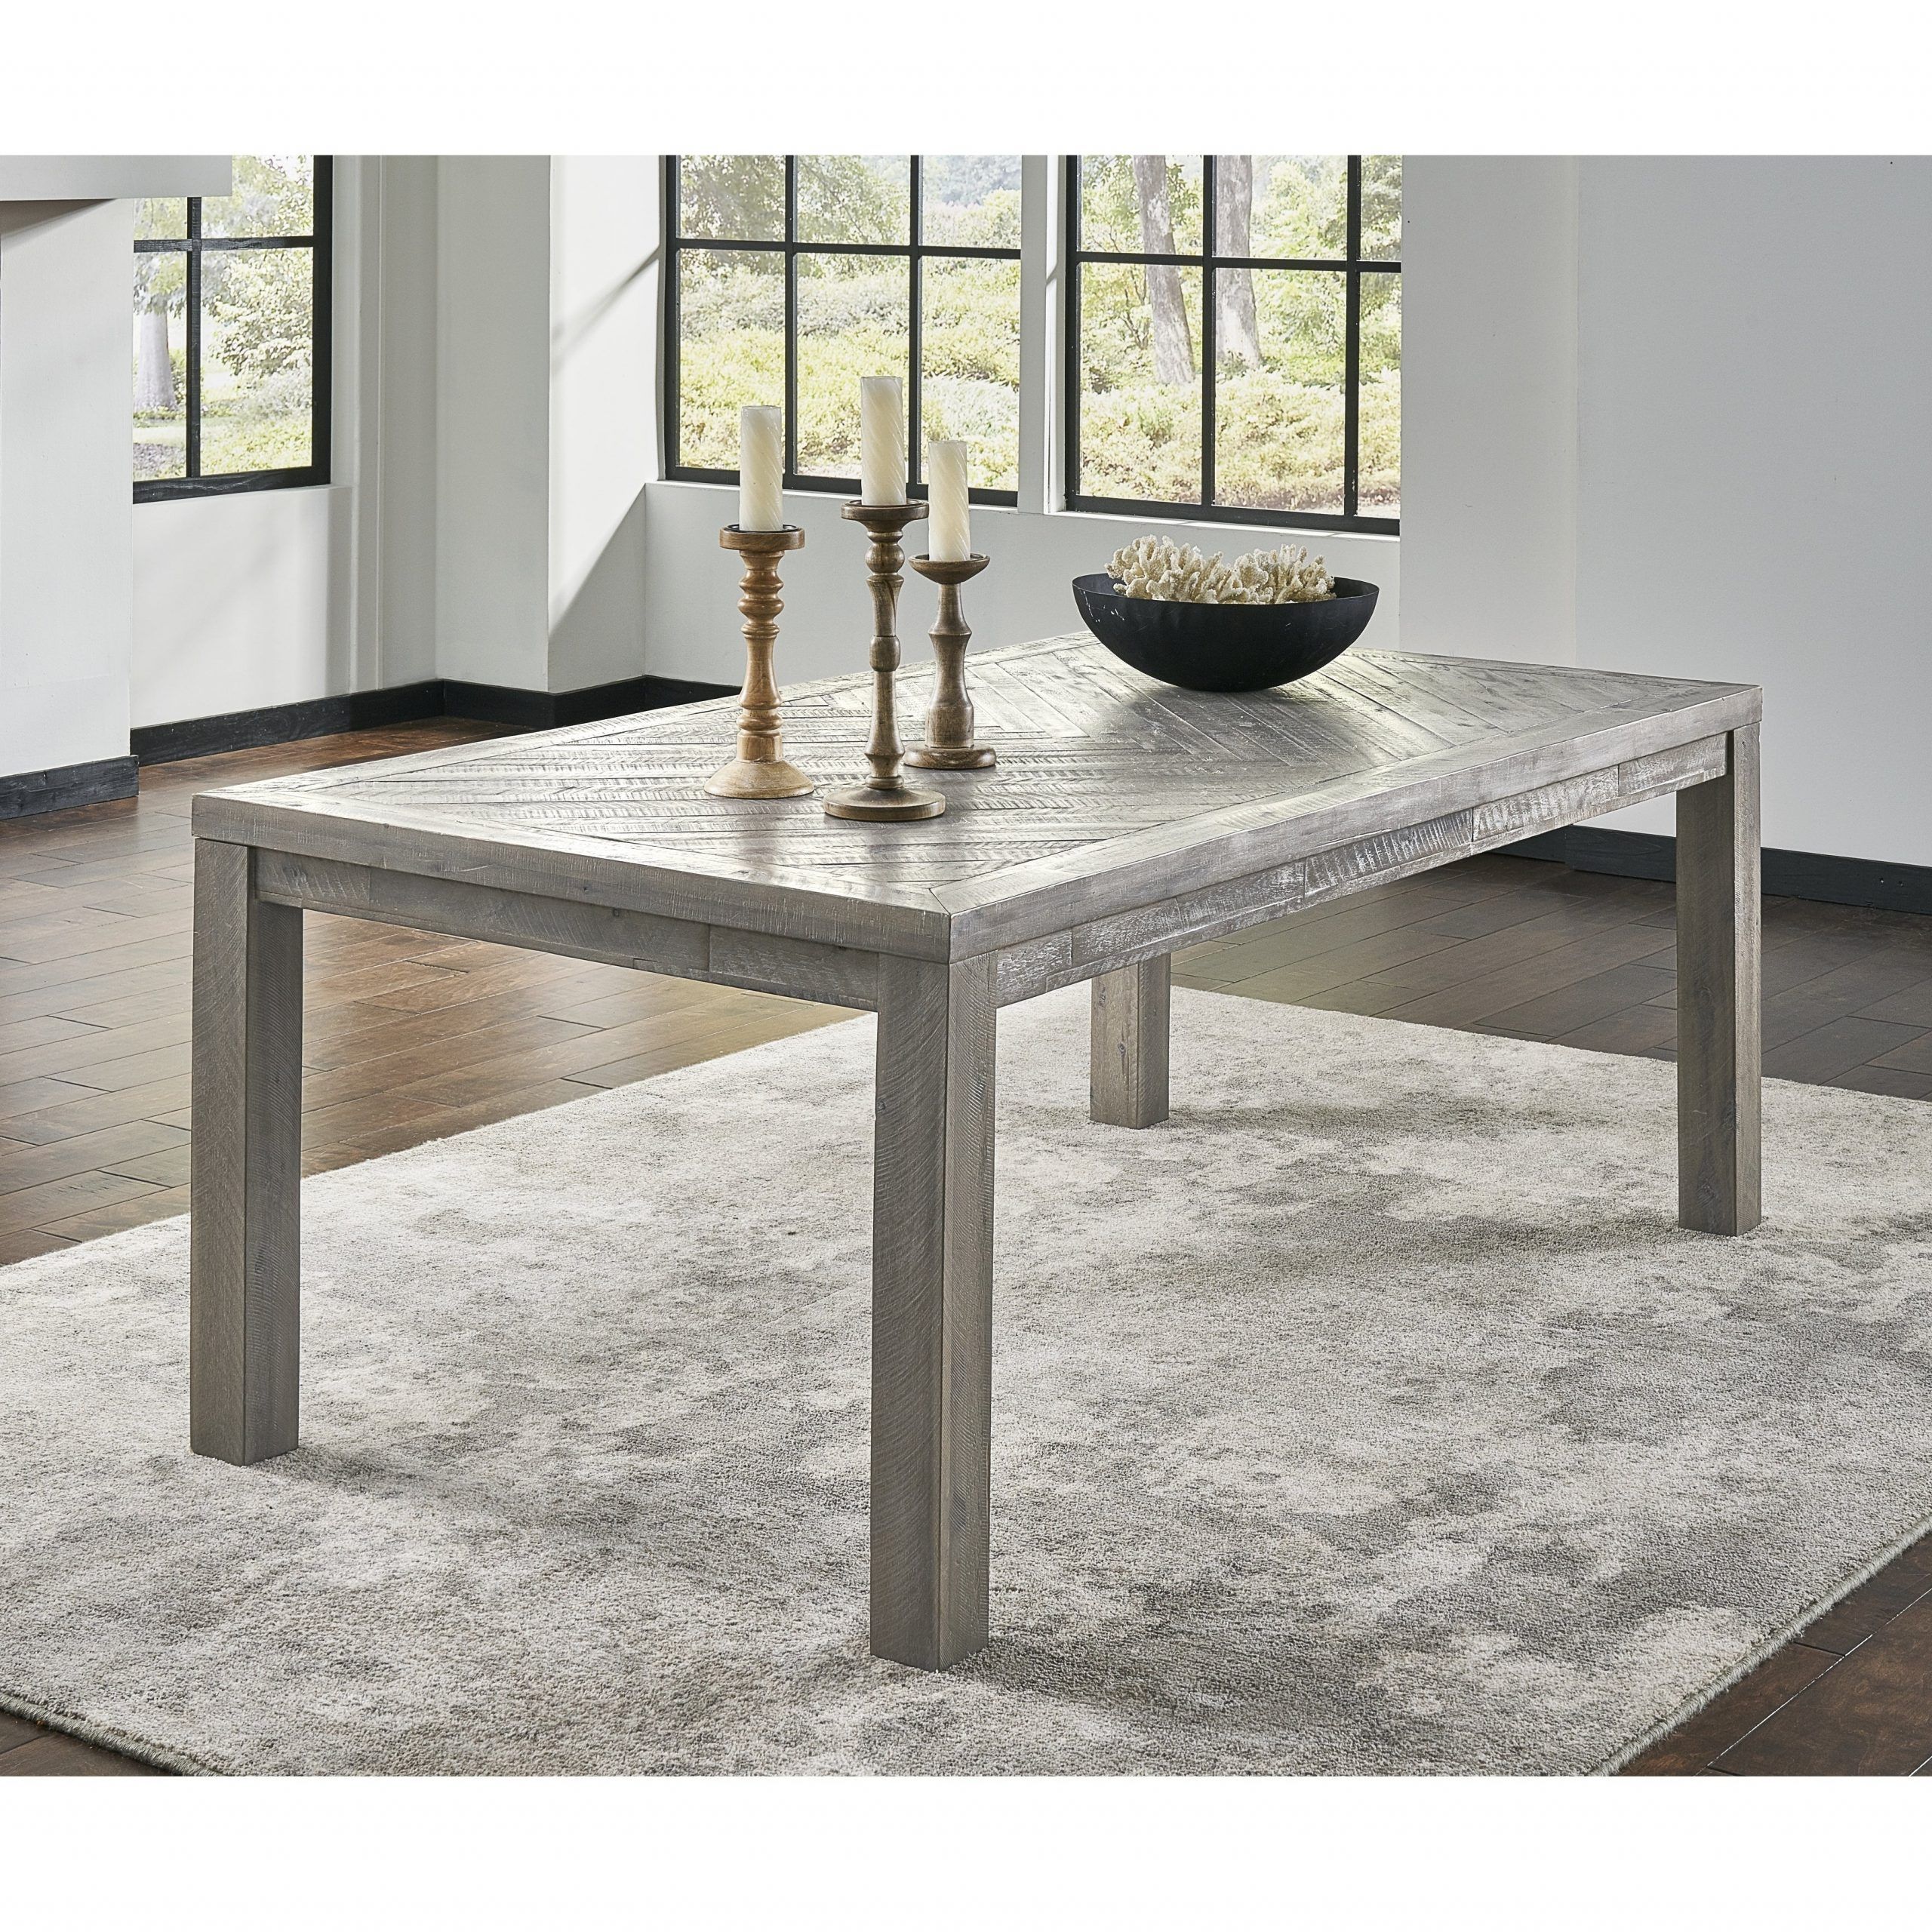 Menlo Reclaimed Wood Extending Dining Tables Pertaining To Widely Used The Gray Barn Daybreak Solid Wood Rectangular Dining Table In Rustic Latte (View 8 of 25)